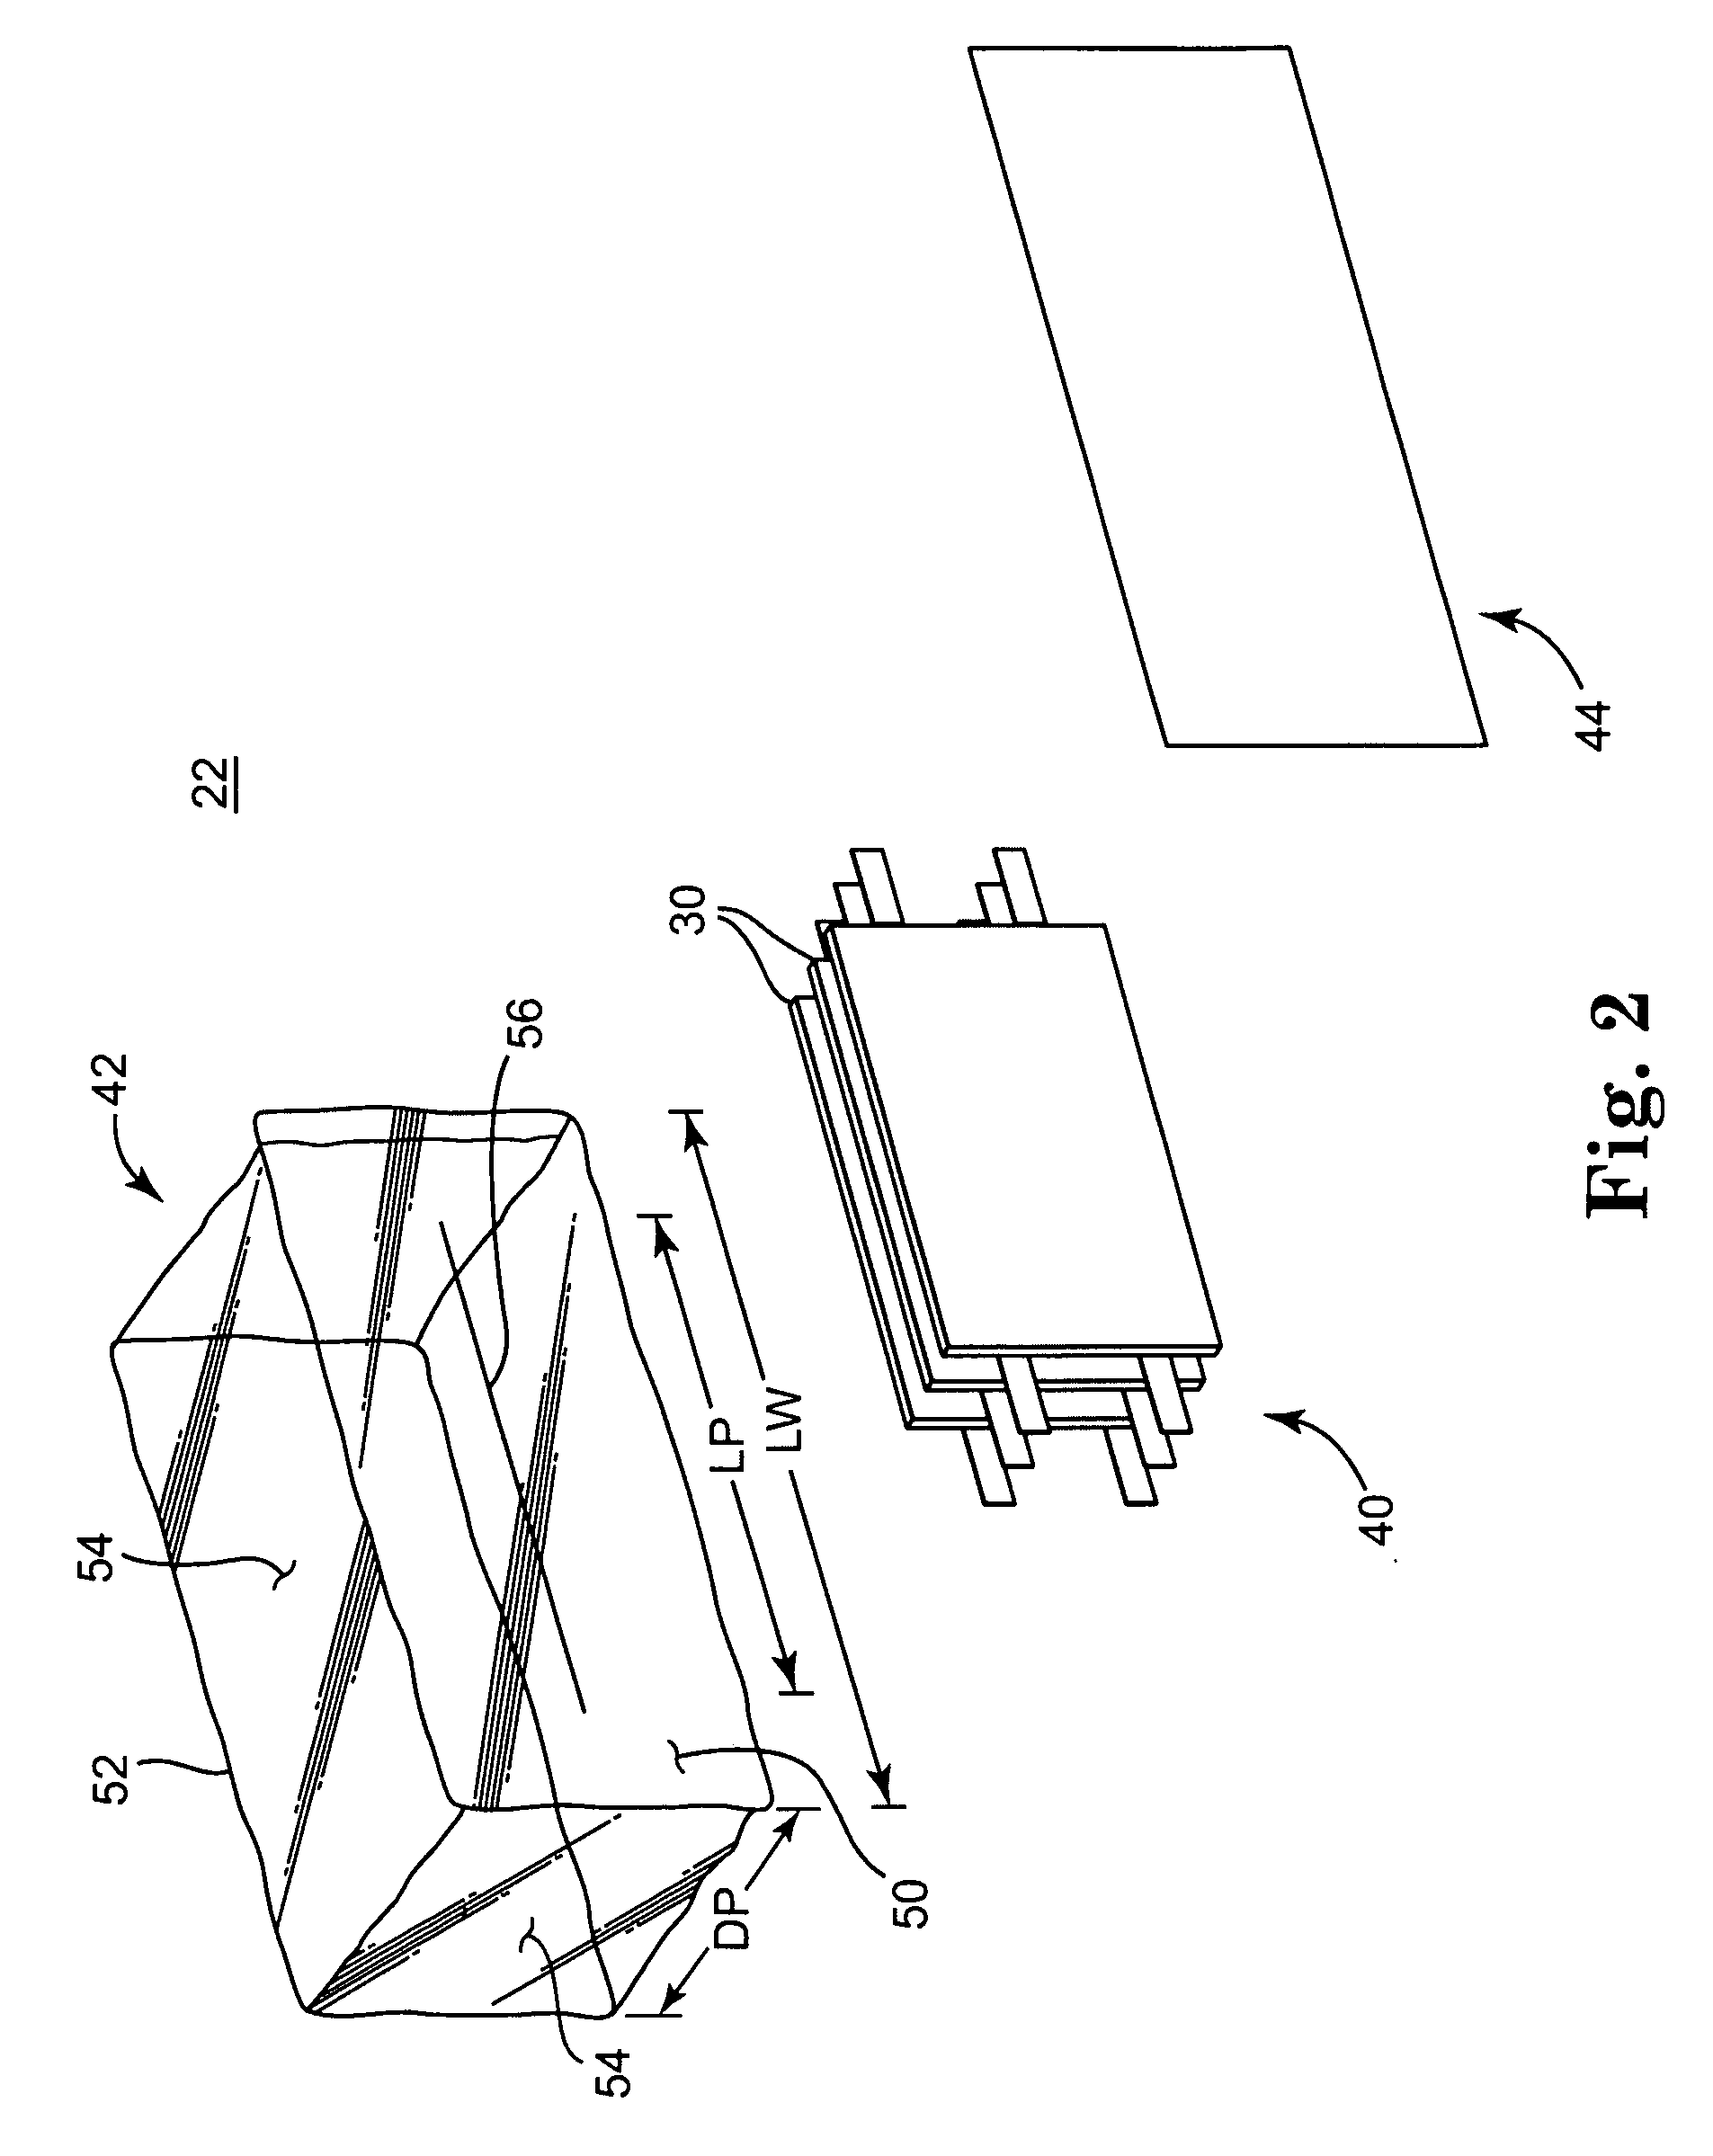 Face mask packaging, dispensing system, and method